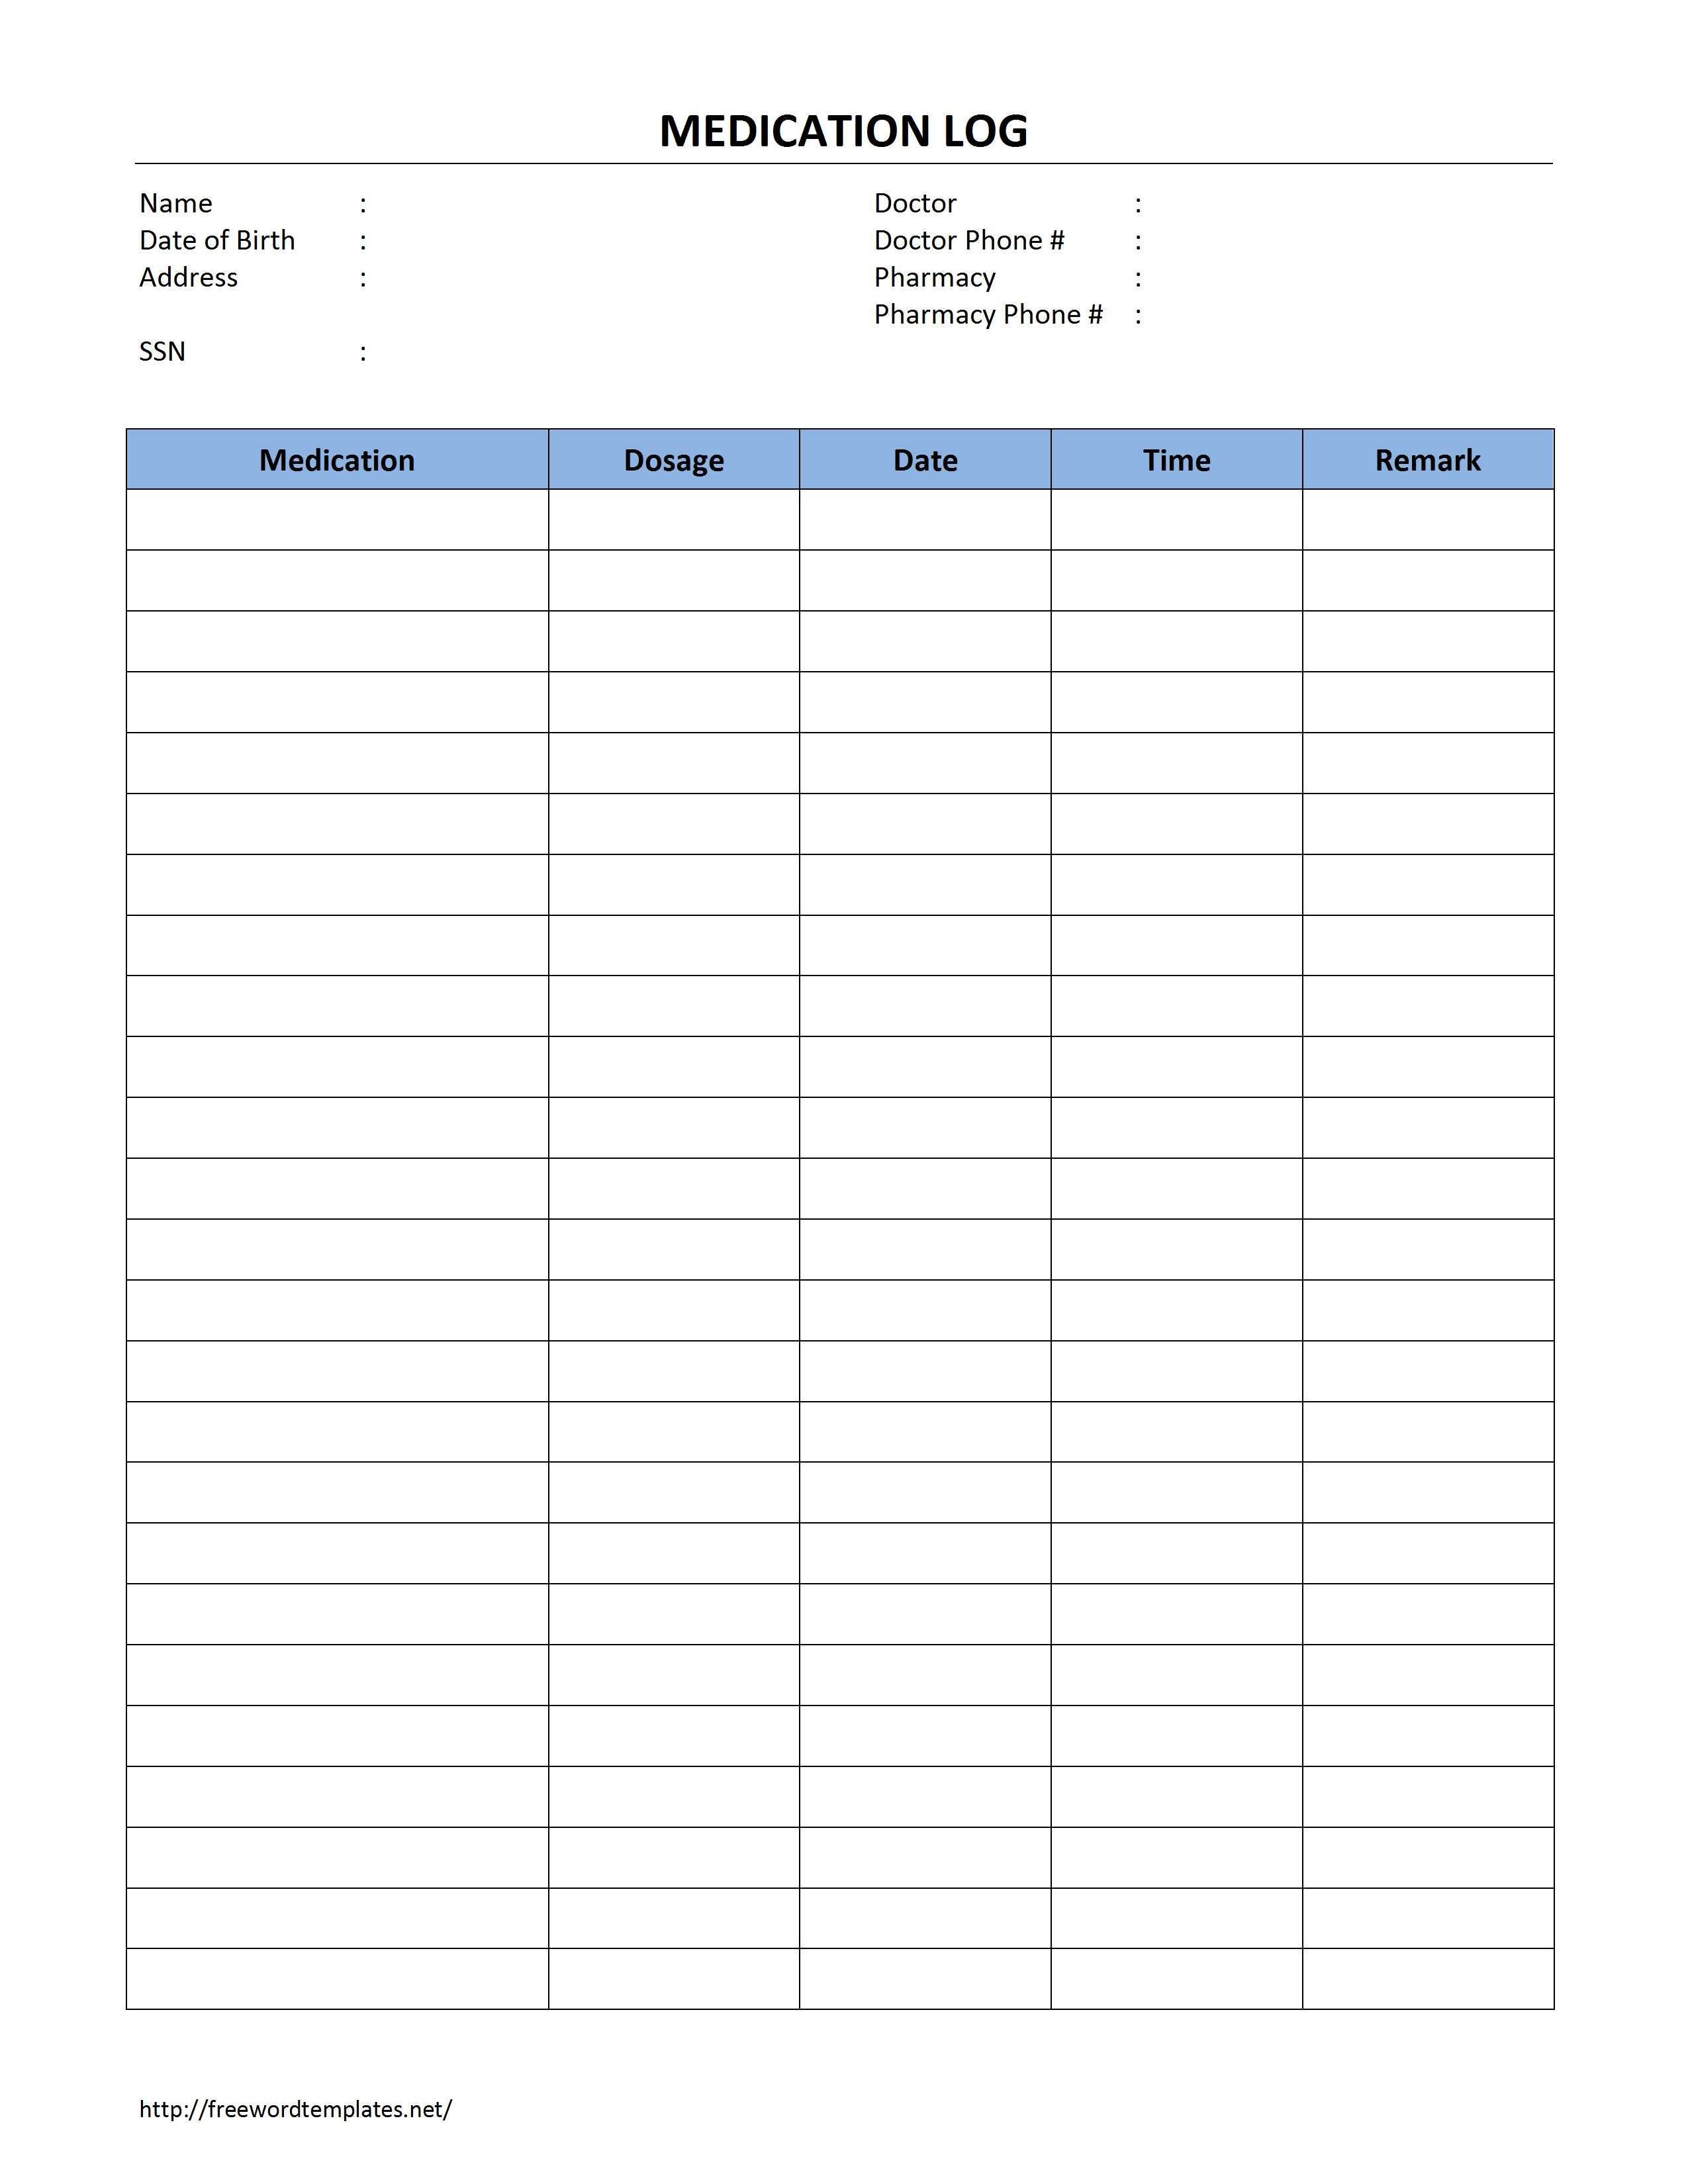 Medical Problem List Template This is A Medication Log Template that You Can Use to